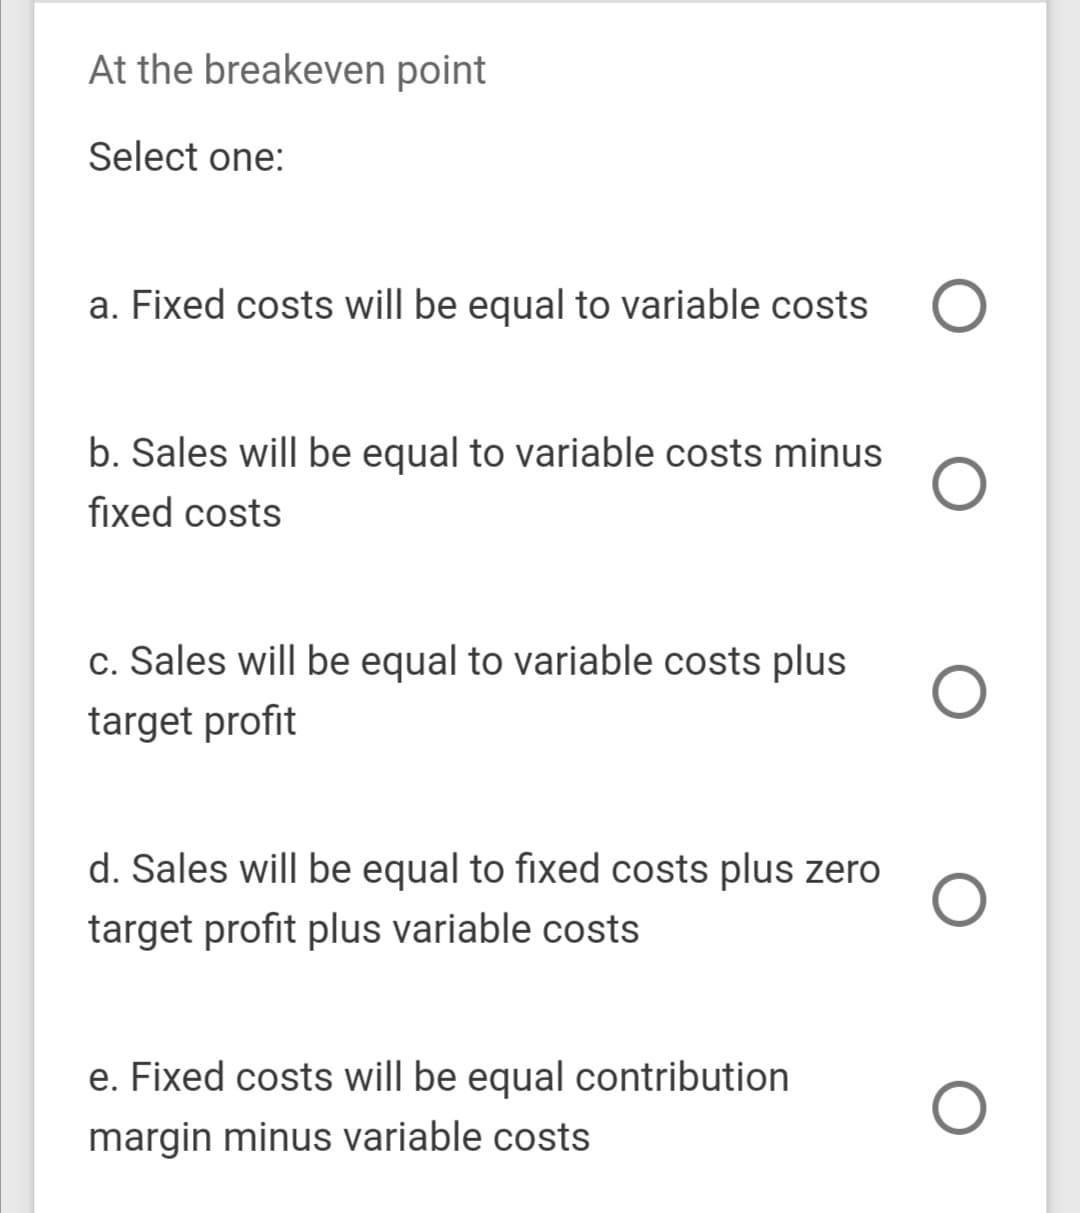 At the breakeven point
Select one:
a. Fixed costs will be equal to variable costs
b. Sales will be equal to variable costs minus
fixed costs
c. Sales will be equal to variable costs plus
target profit
d. Sales will be equal to fixed costs plus zero
target profit plus variable costs
e. Fixed costs will be equal contribution
margin minus variable costs
